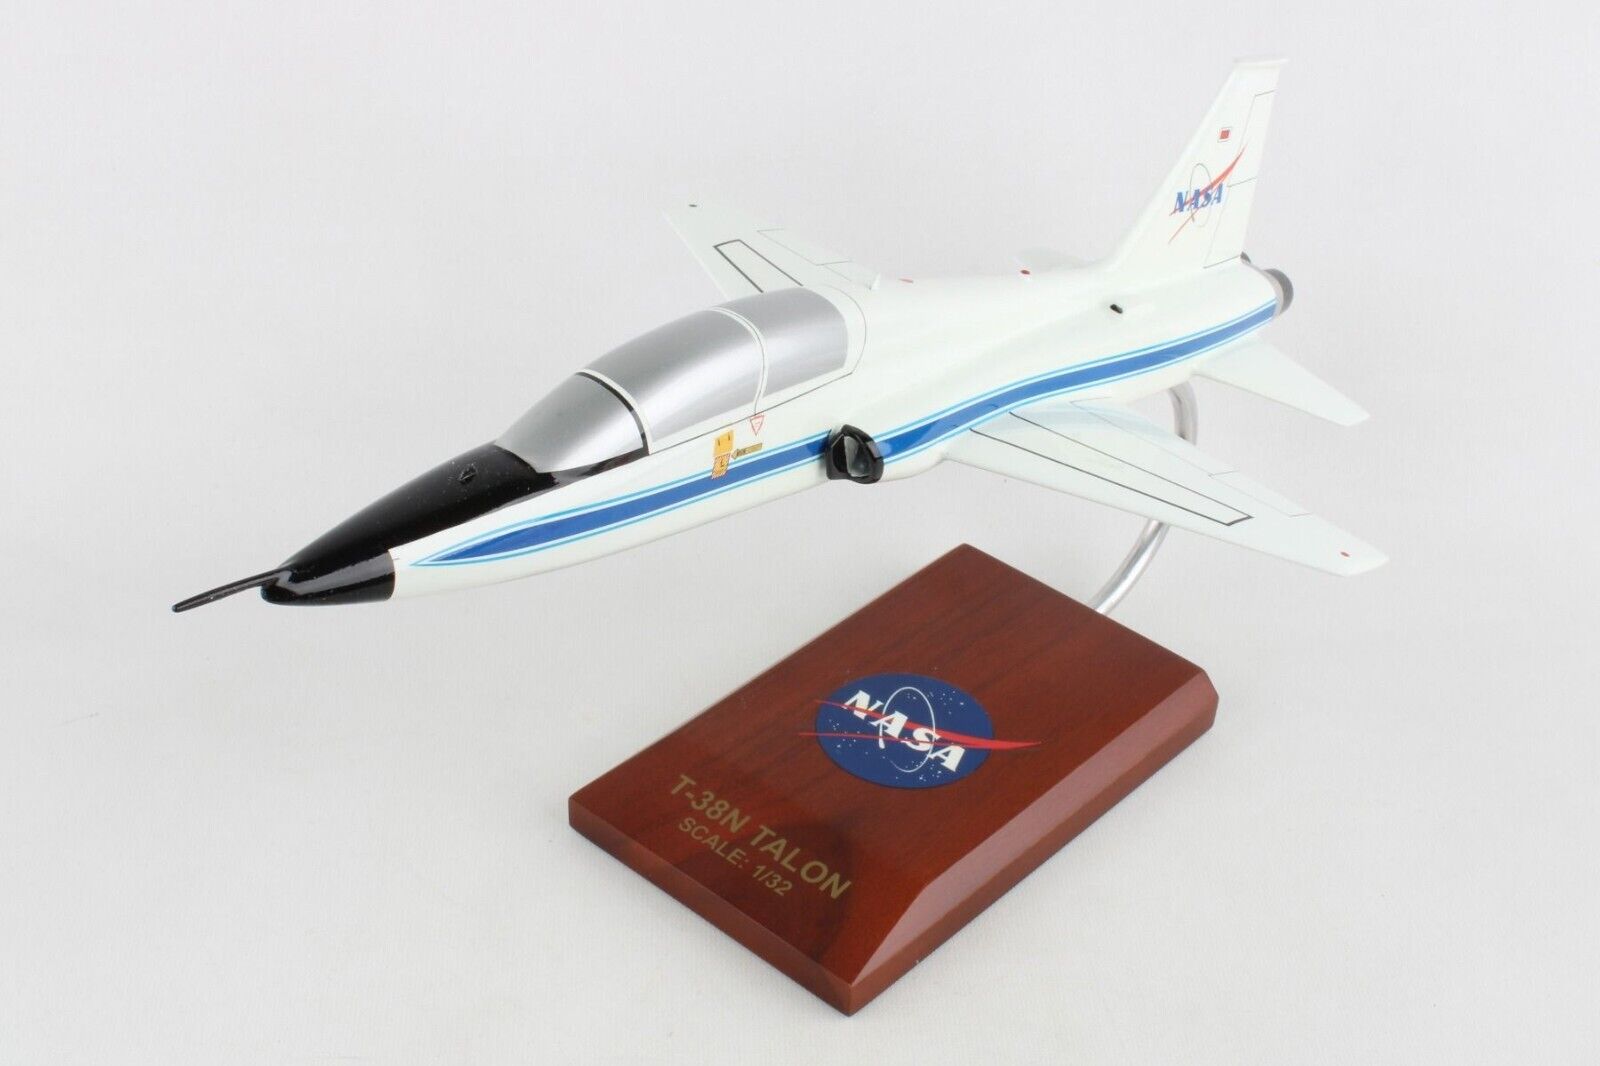 ALDO Creative Arts Collectibles Scale Model 17.00" in length has a 8.25" wingspan / NEW / Wood NASA Northrop T-38N Talon Airplane Wood Model Assembled